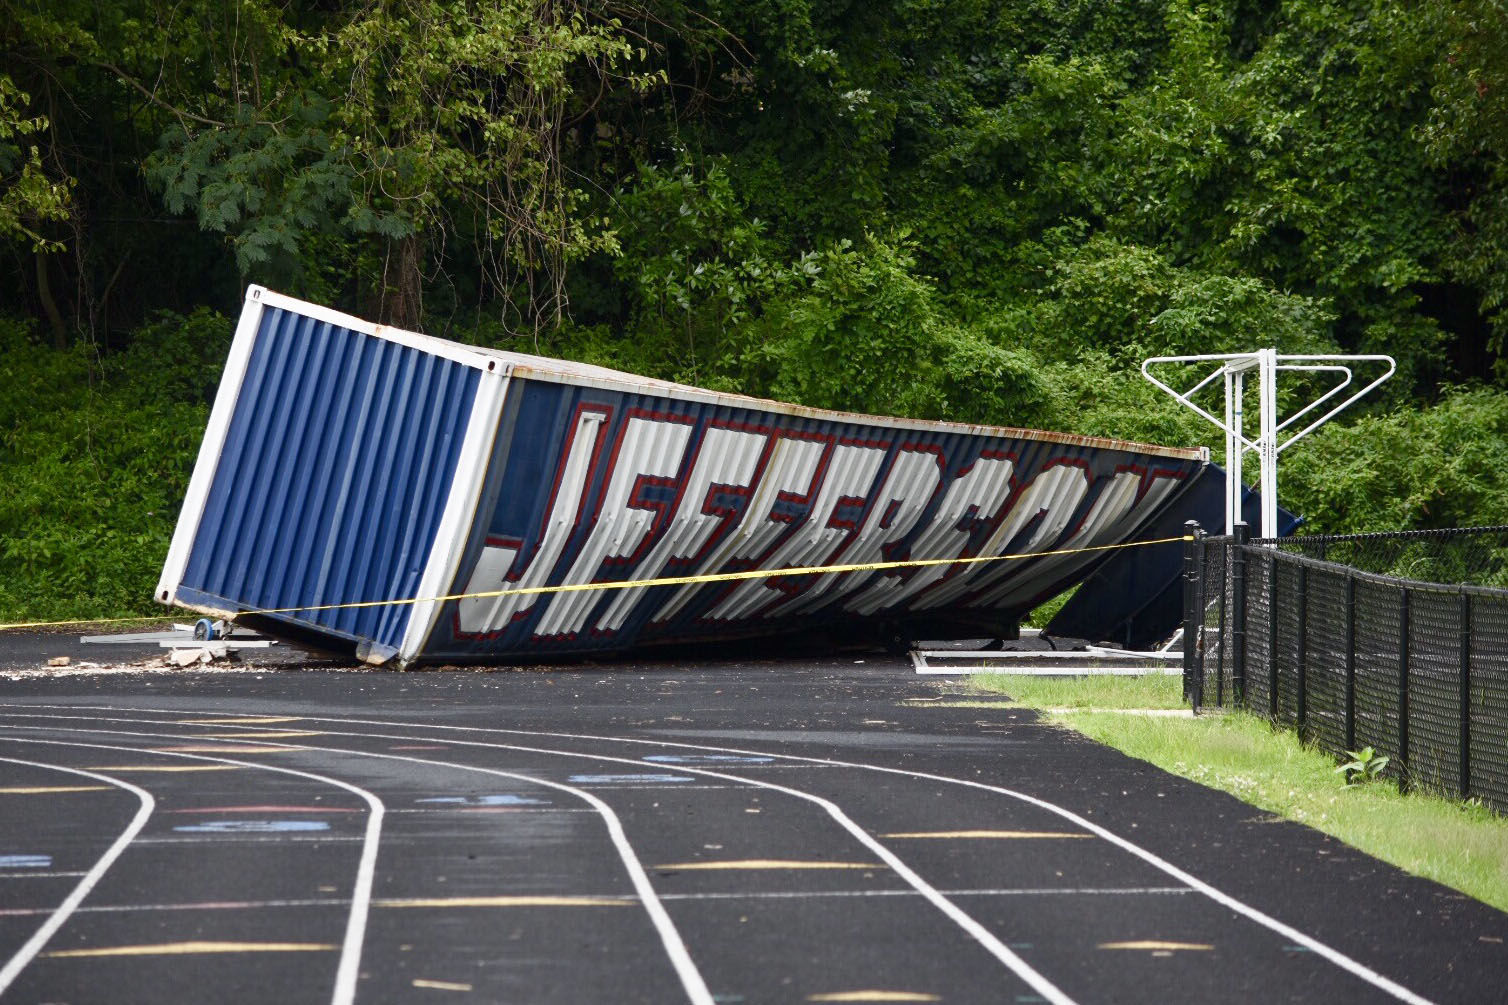 The EF-0 tornado that briefly touched down near Thomas Jefferson High School in Licnolnia, Virginia, area also lofted a shipping container over 100 yards. (WTOP/Dave Dildine)